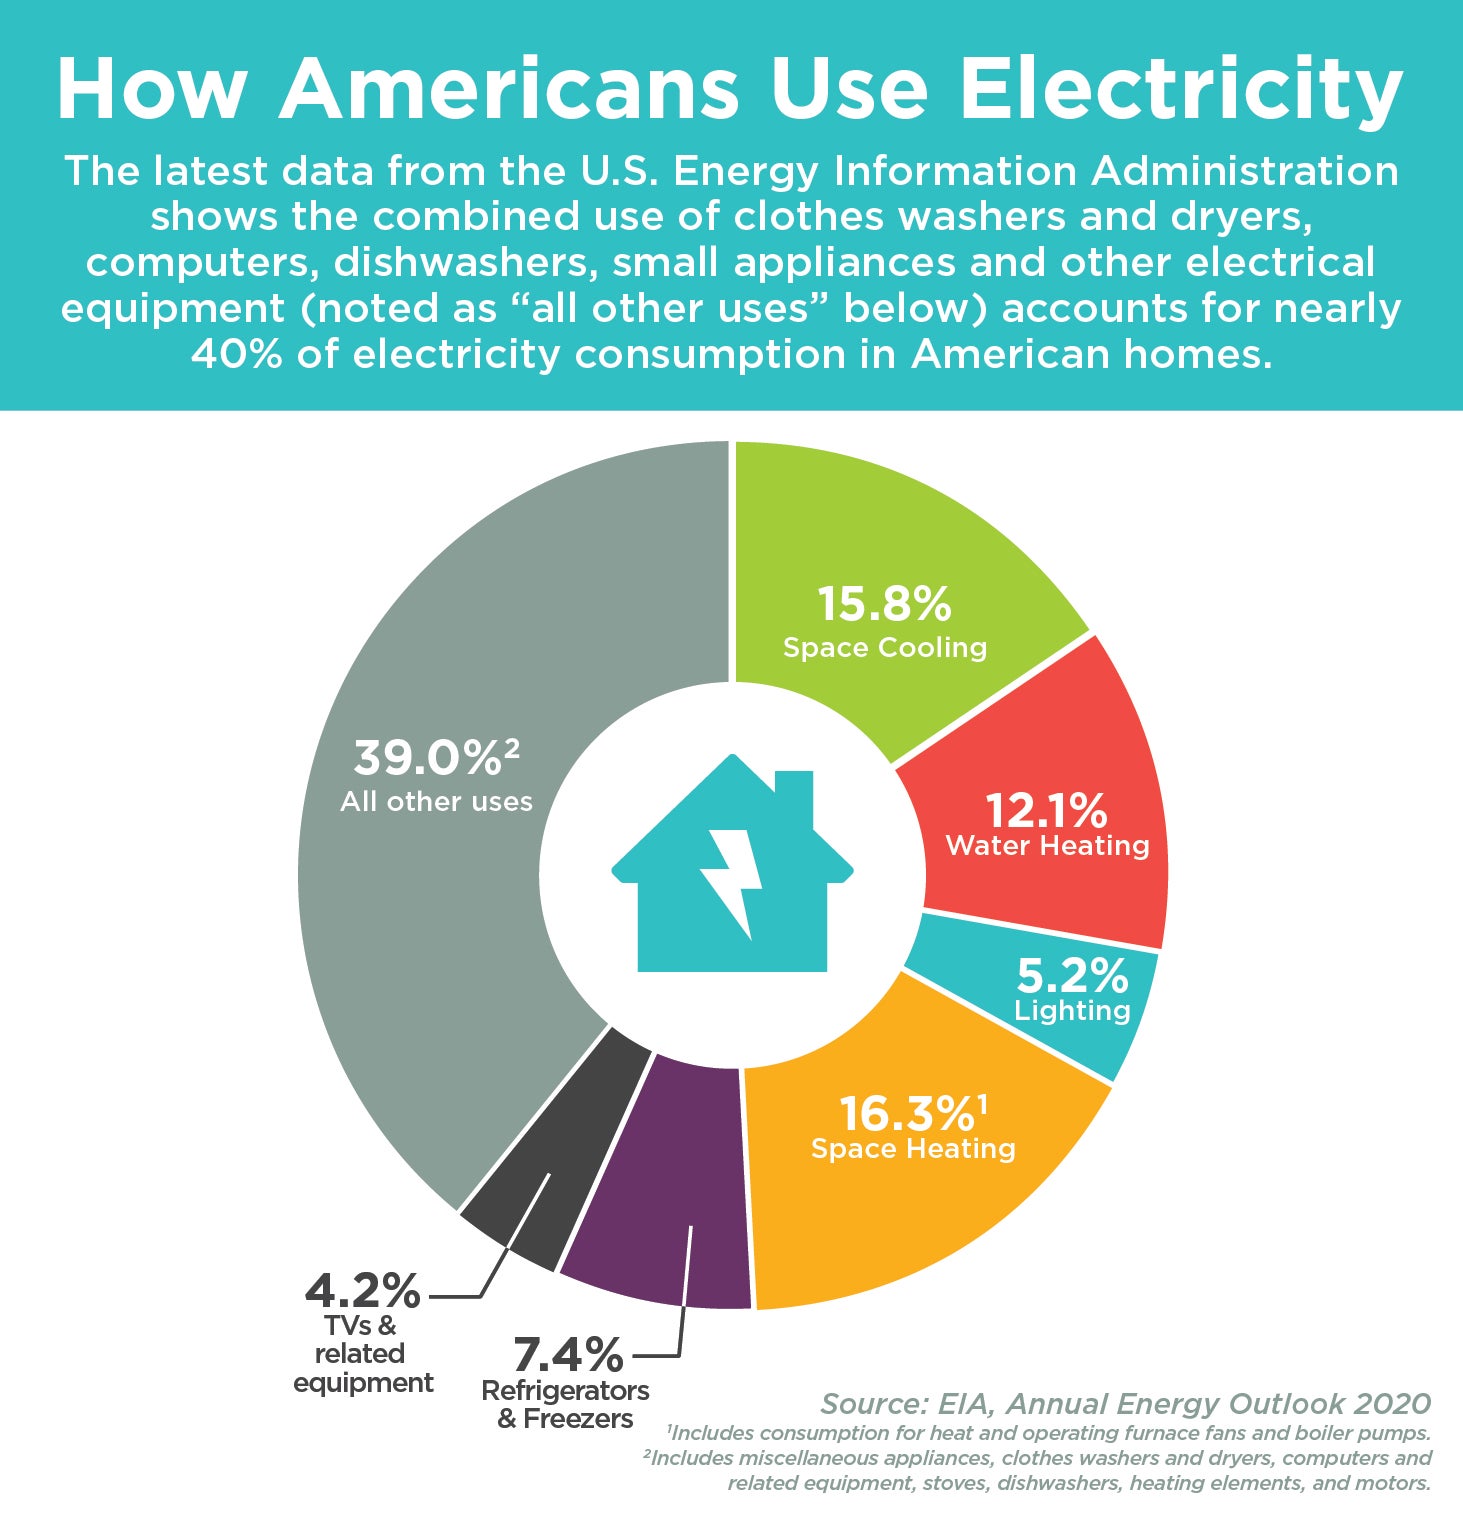 How Americans Use Electricity Pie Chart